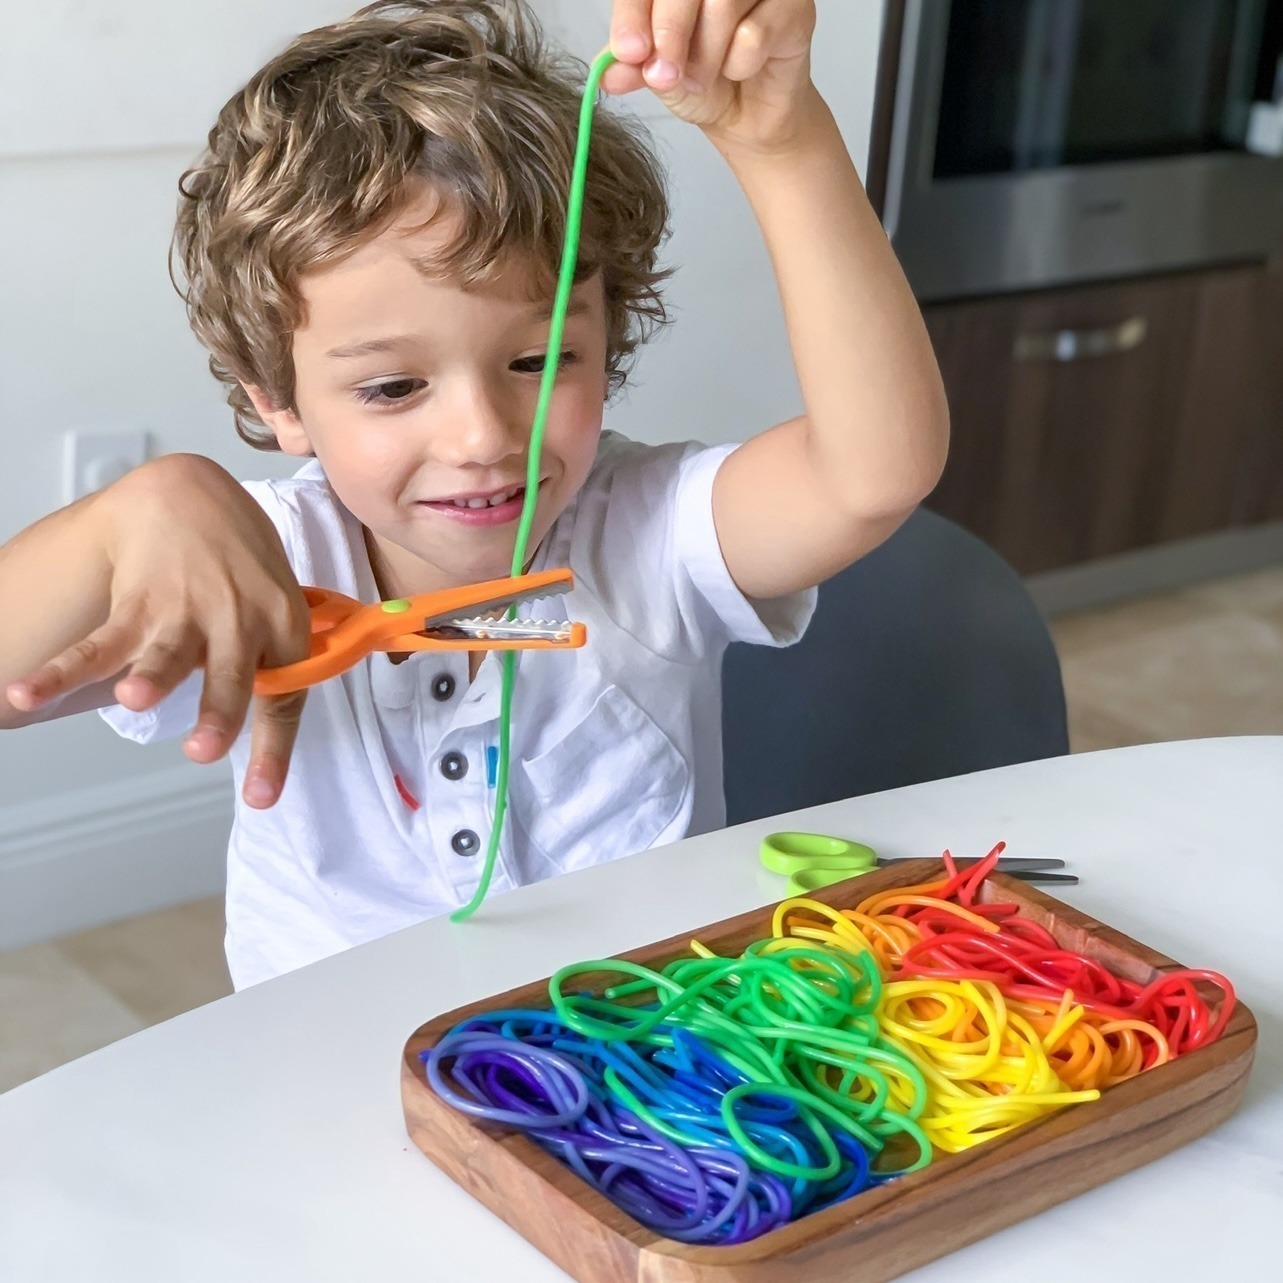 Cut the pasta snacktivity for kids using rainbow colored pasta